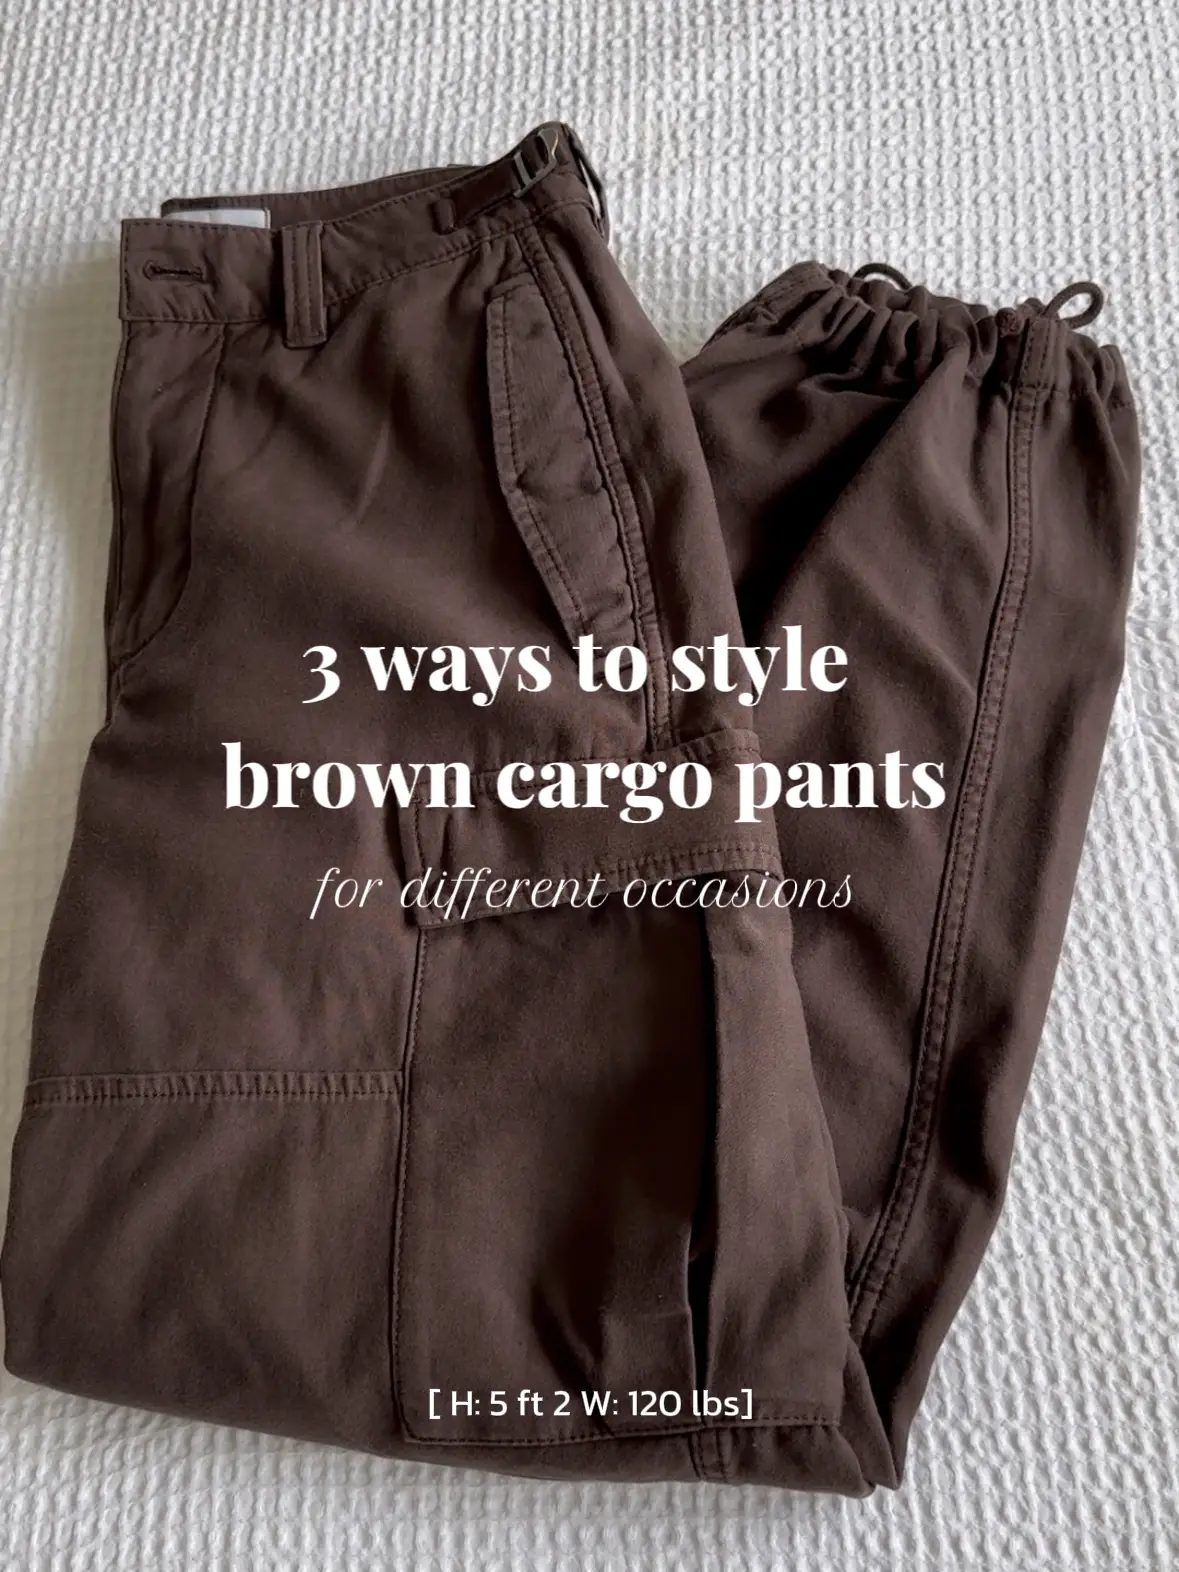 Beige Cargo Pants V7  Cargo pants outfit, Jogger pants outfit